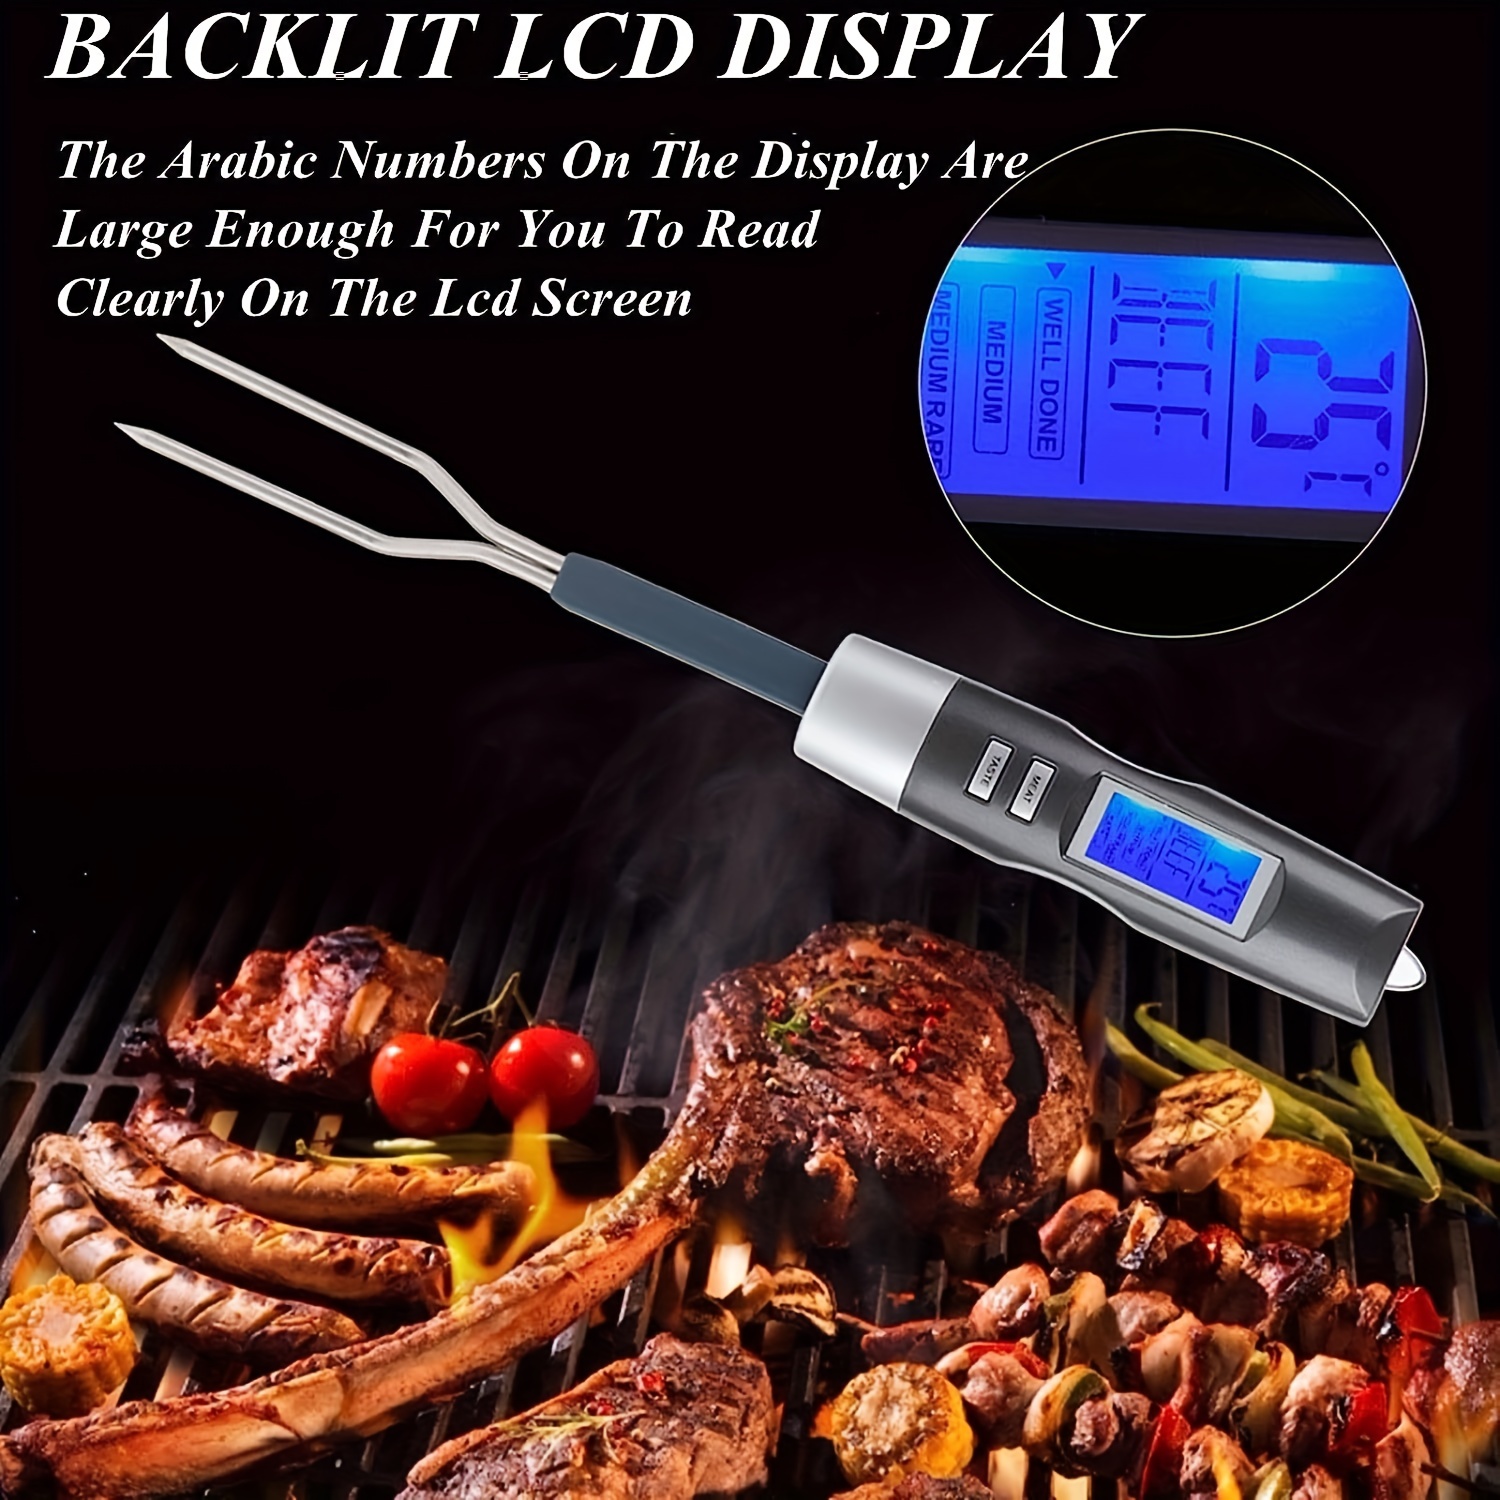 Commercial Digital Instant Read Thermometer- Precise, Backlight, Magnet, Folding PROBE. Great for BQQ, Grill, Meat, Candy, Frying by Grillers Choice